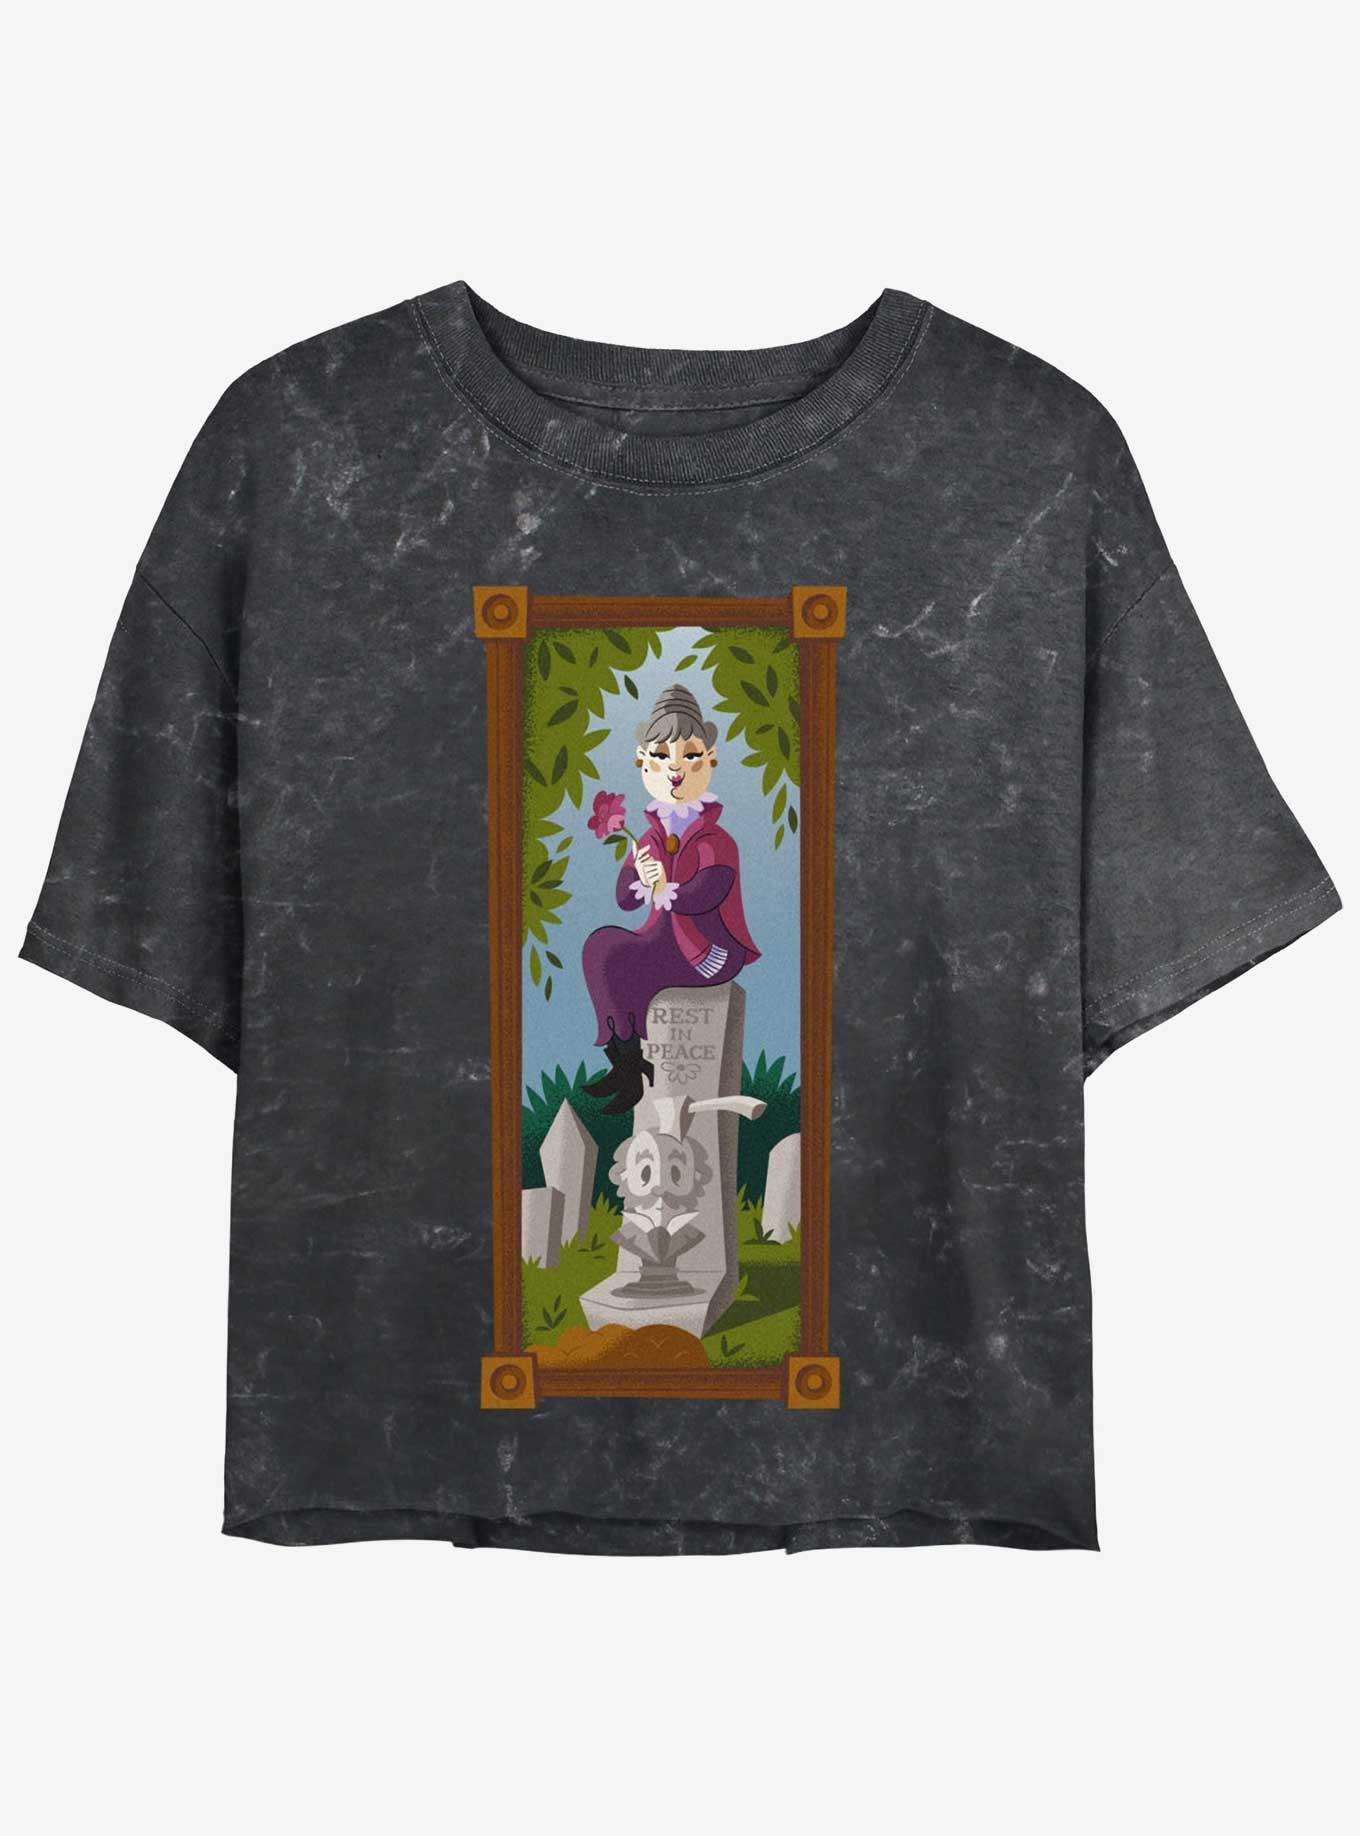 Disney The Haunted Mansion The Black Widow Portrait Girls Mineral Wash Crop T-Shirt Hot Topic Web Exclusive, BLACK, hi-res